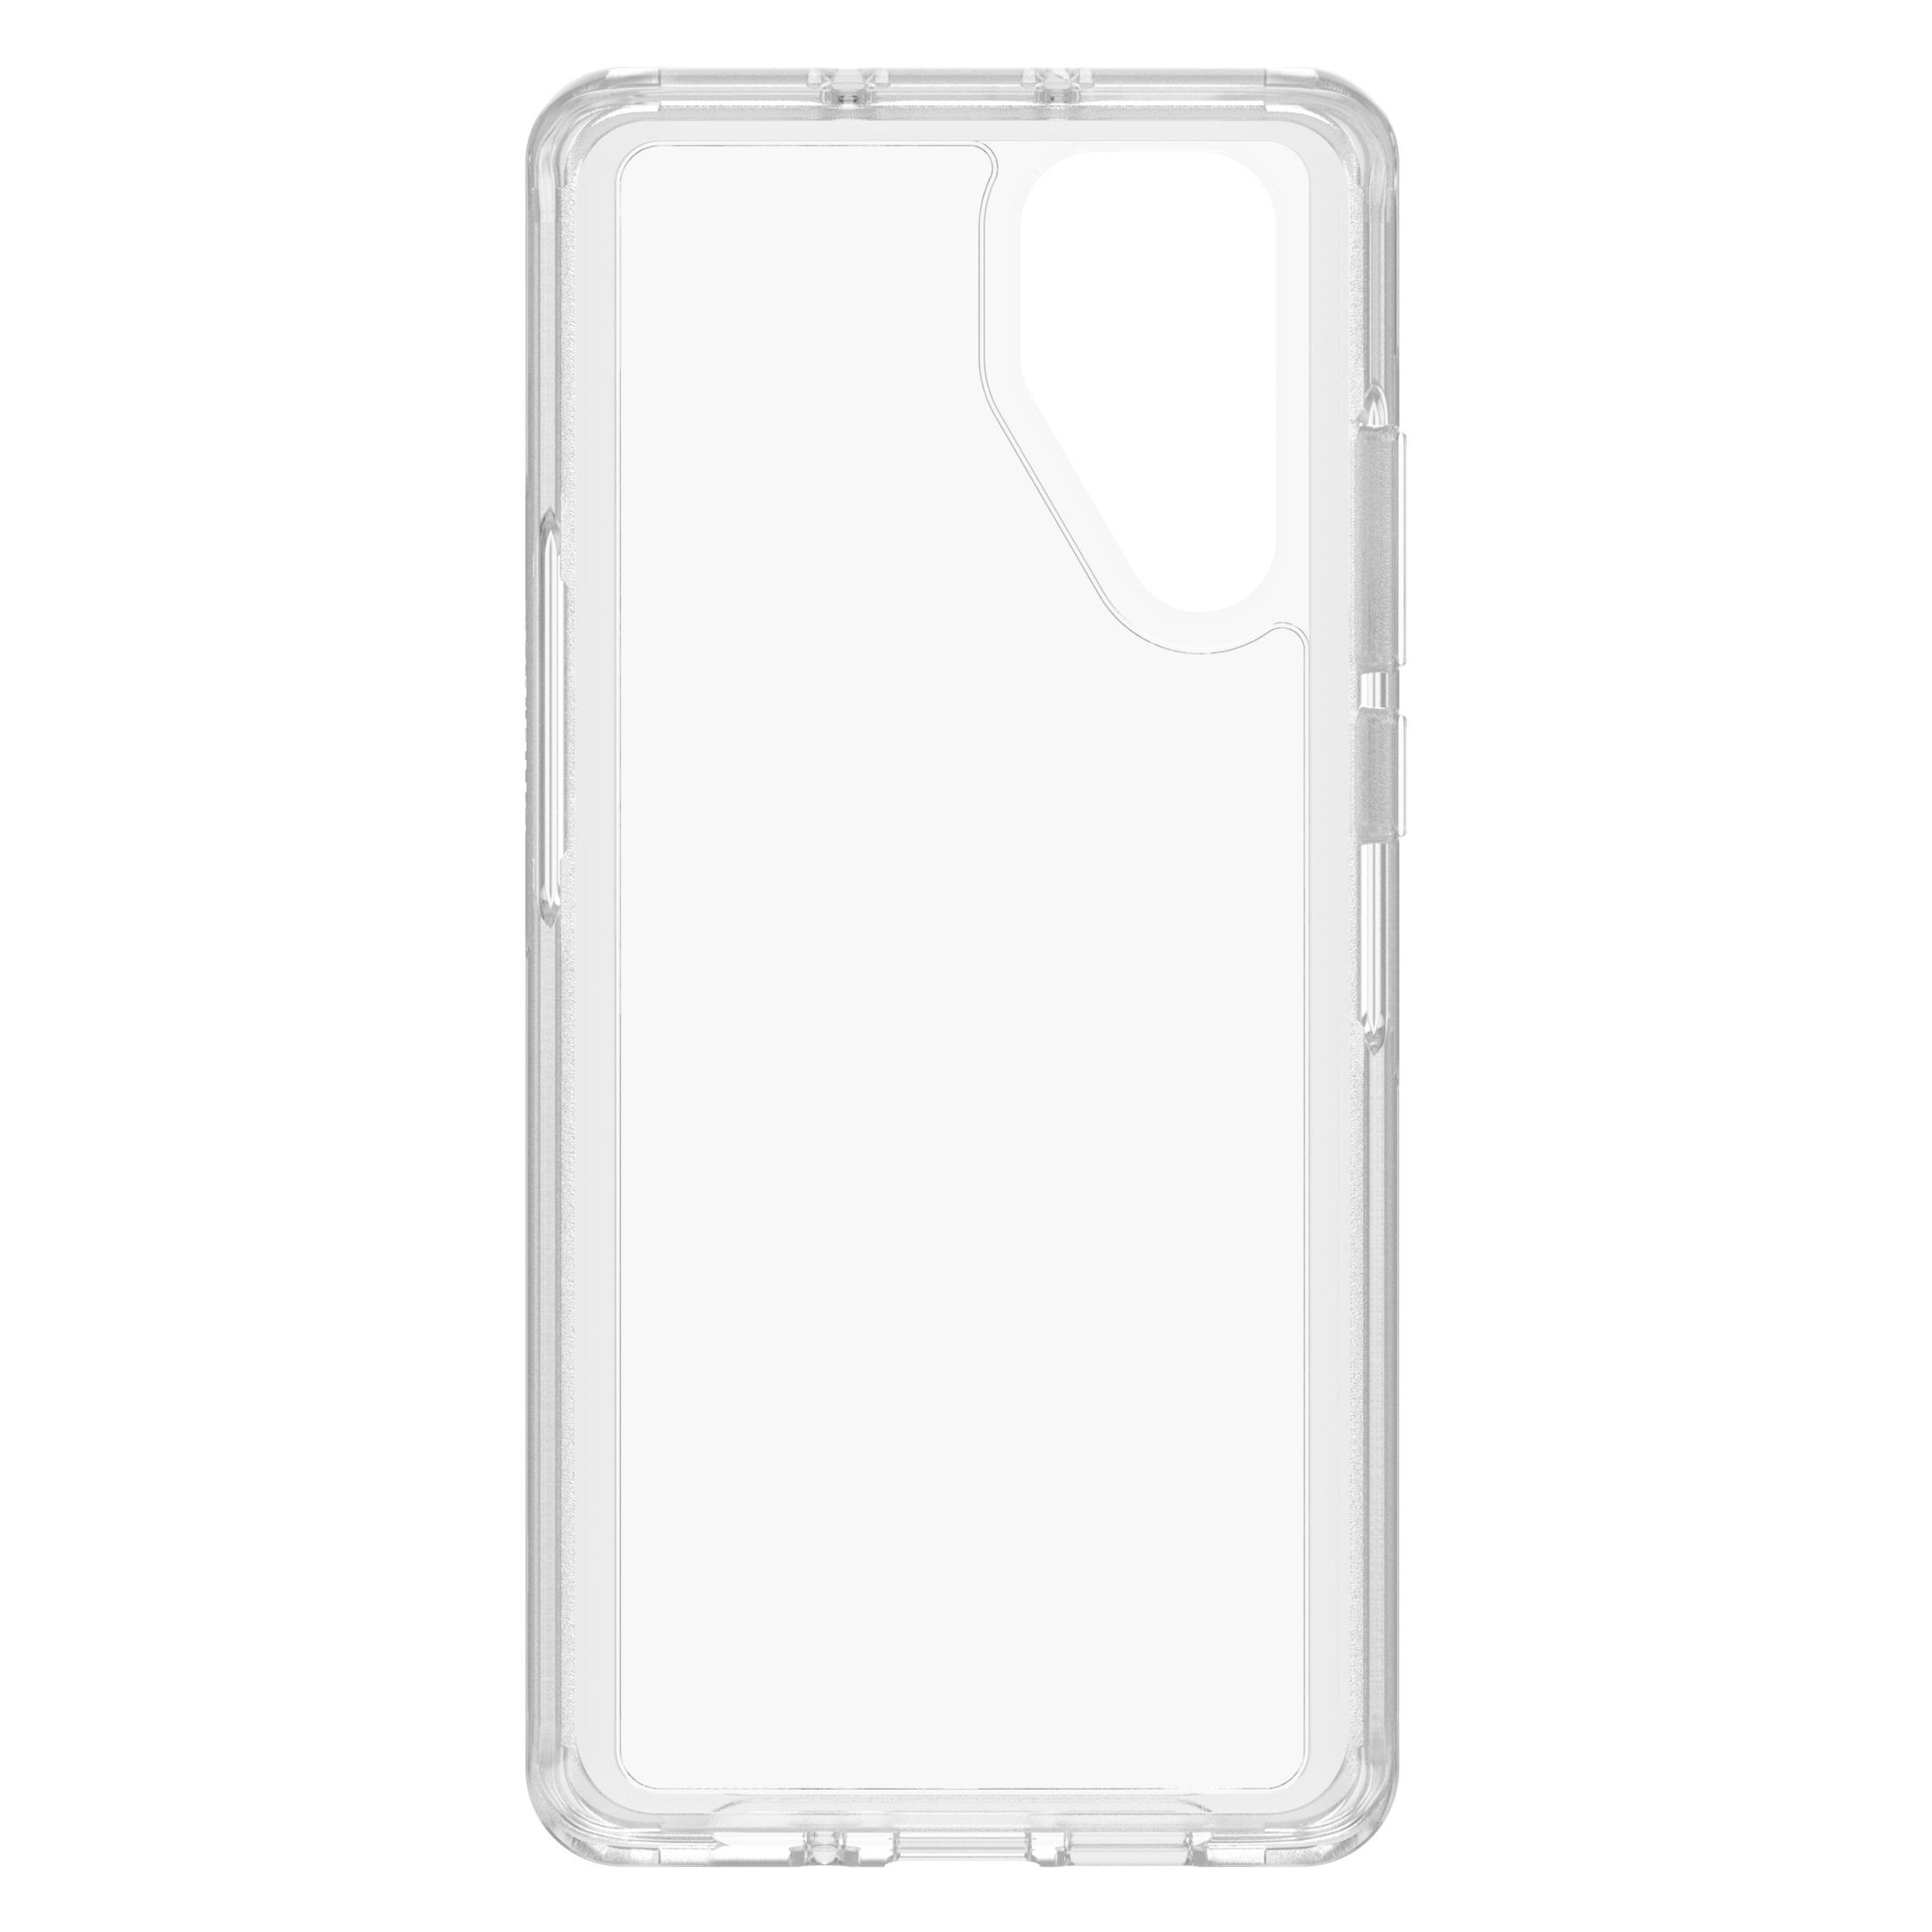 OTTERBOX CLEAR, Backcover, Huawei, P30 Pro, P30PRO 77-61988 SYMMETRY Transparent